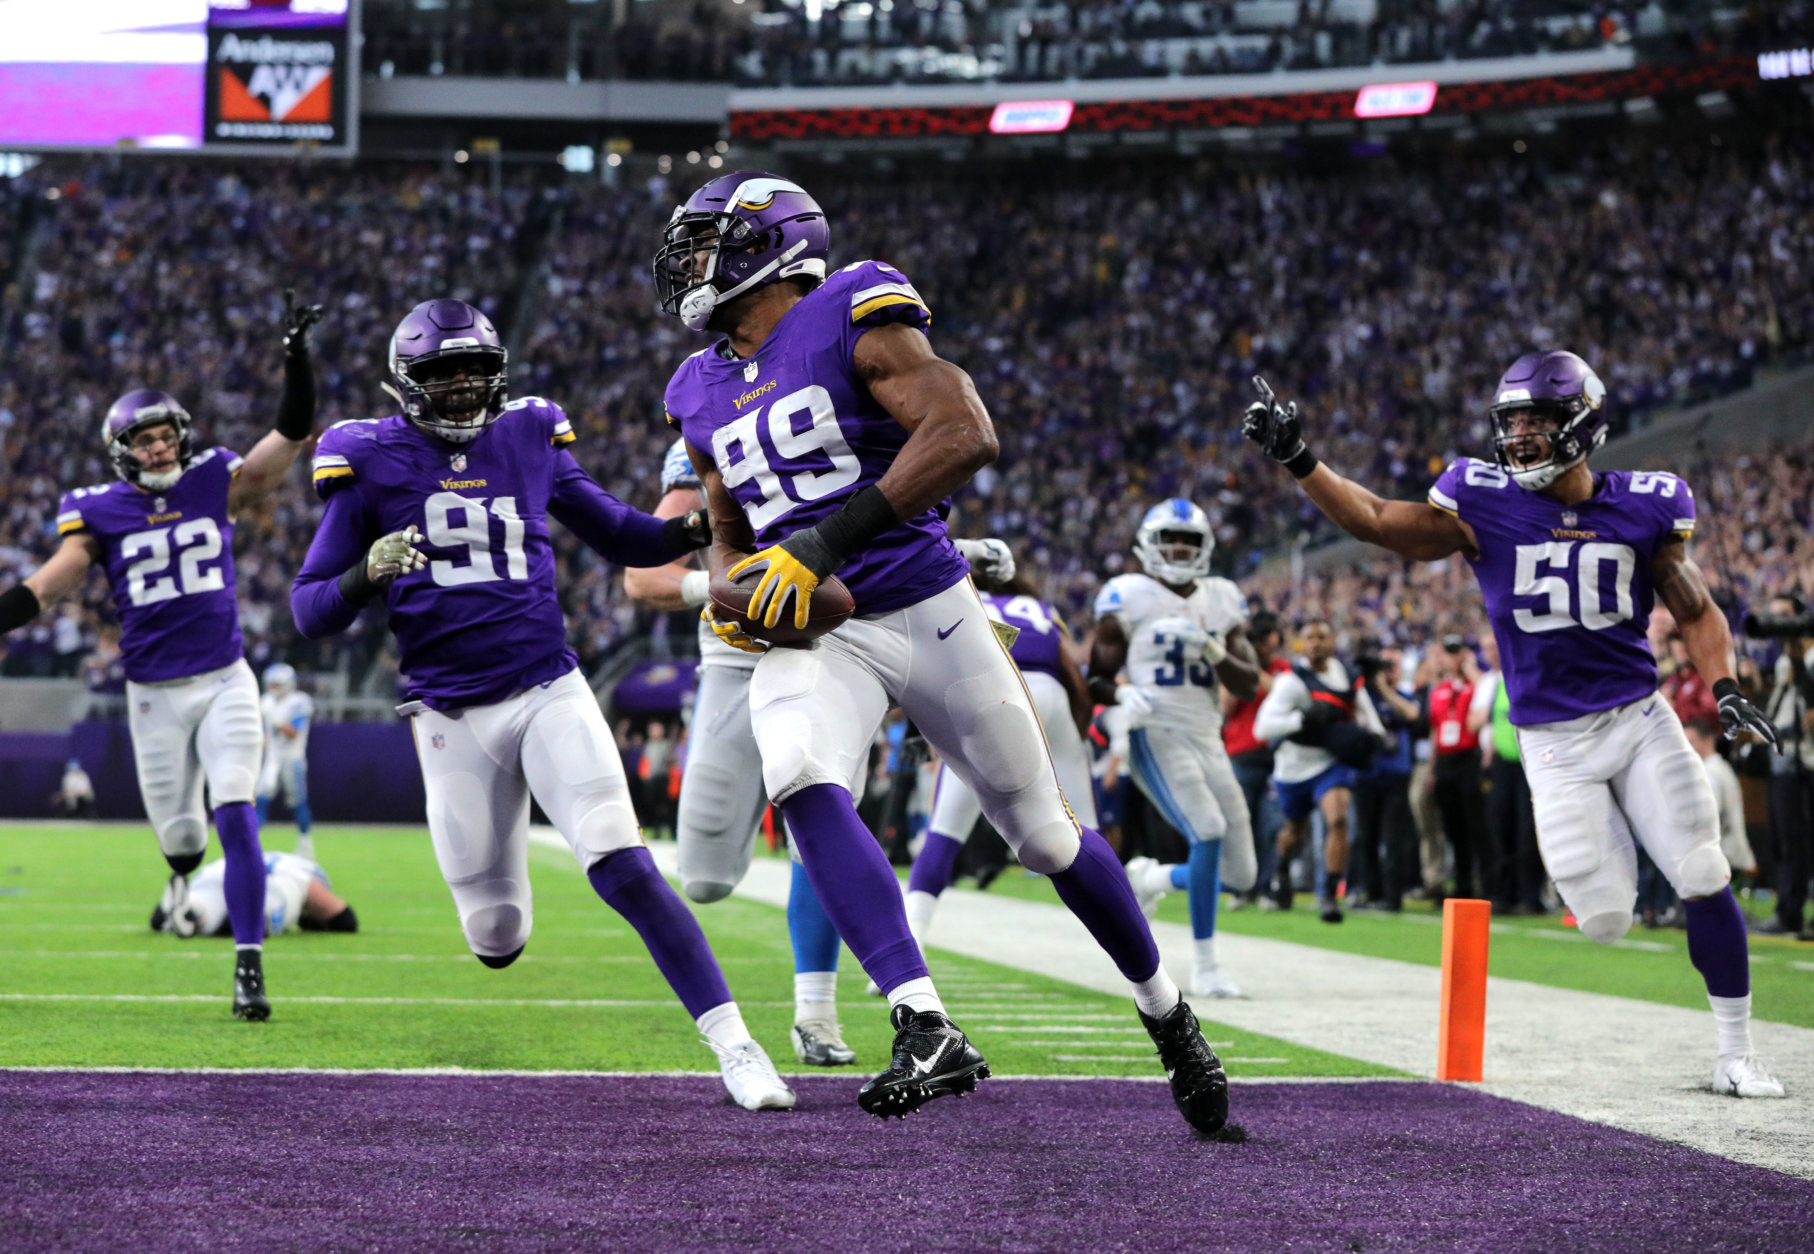 MINNEAPOLIS, MN - NOVEMBER 4: Danielle Hunter #99 of the Minnesota Vikings scores a touchdown after recovering a fumble in the fourth quarter of the game against the Detroit Lions at U.S. Bank Stadium on November 4, 2018 in Minneapolis, Minnesota. (Photo by Adam Bettcher/Getty Images)